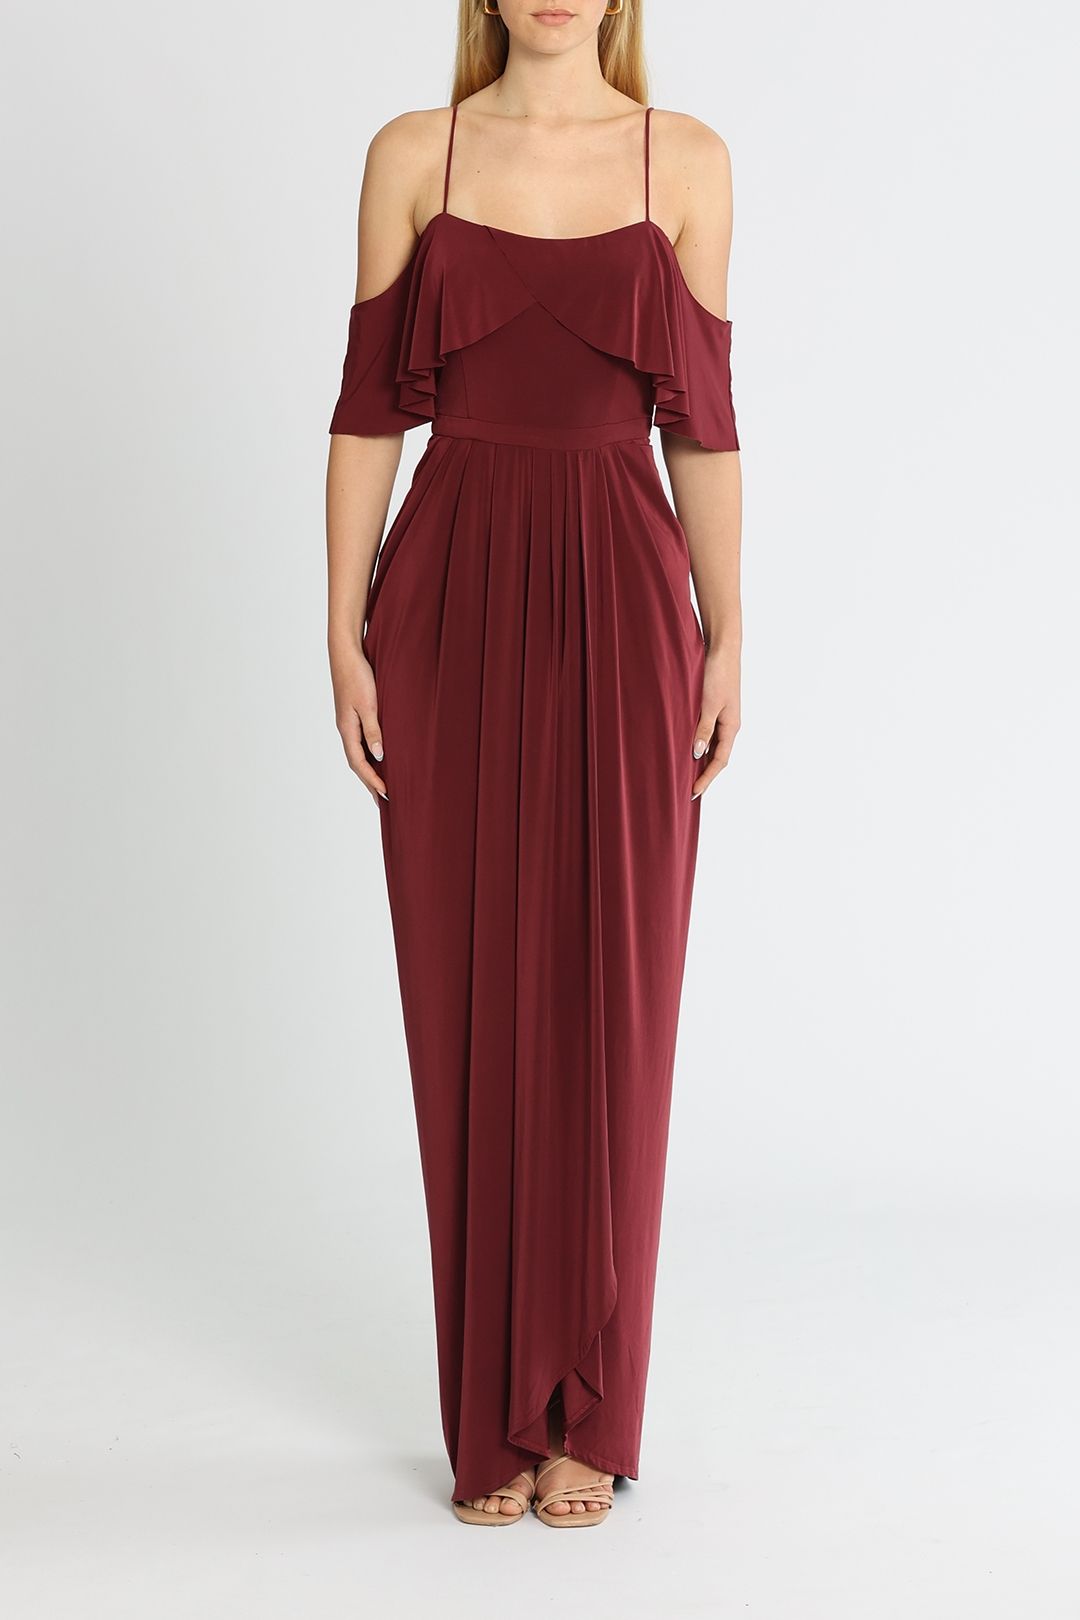 Hire Arianna Gown in Wine, Tania Olsen